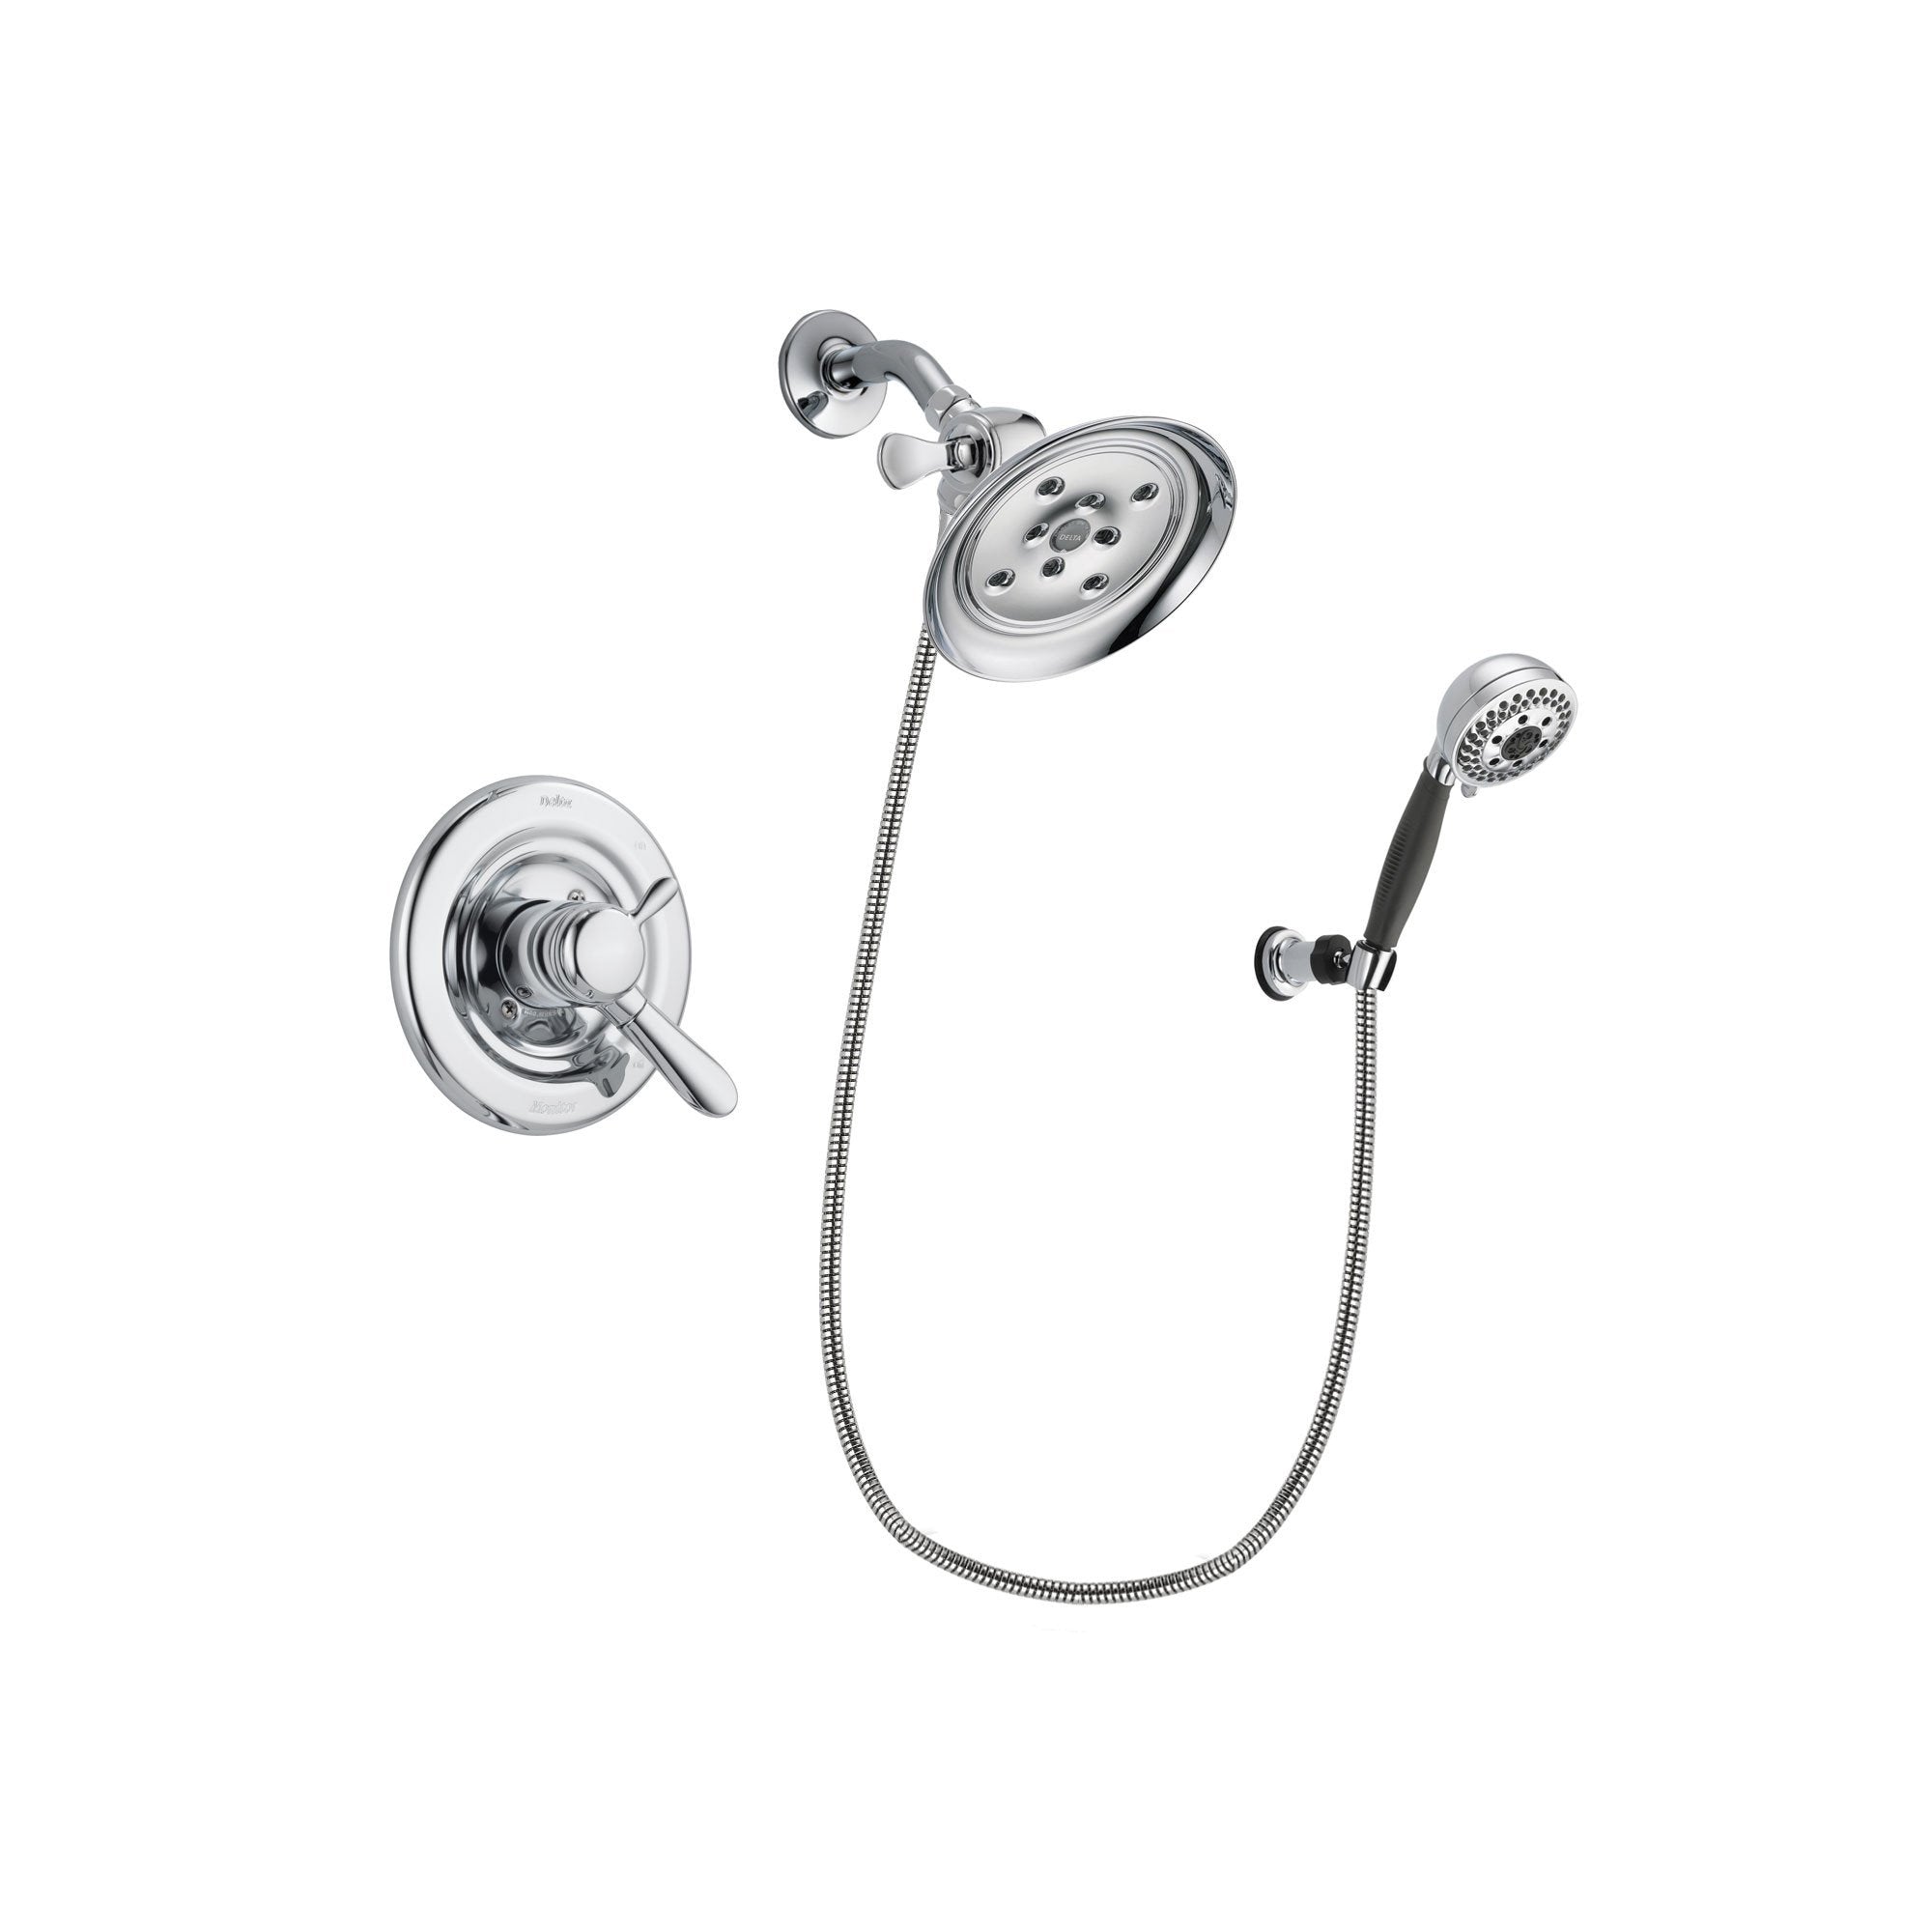 Delta Lahara Chrome Shower Faucet System w/ Shower Head and Hand Shower DSP1194V